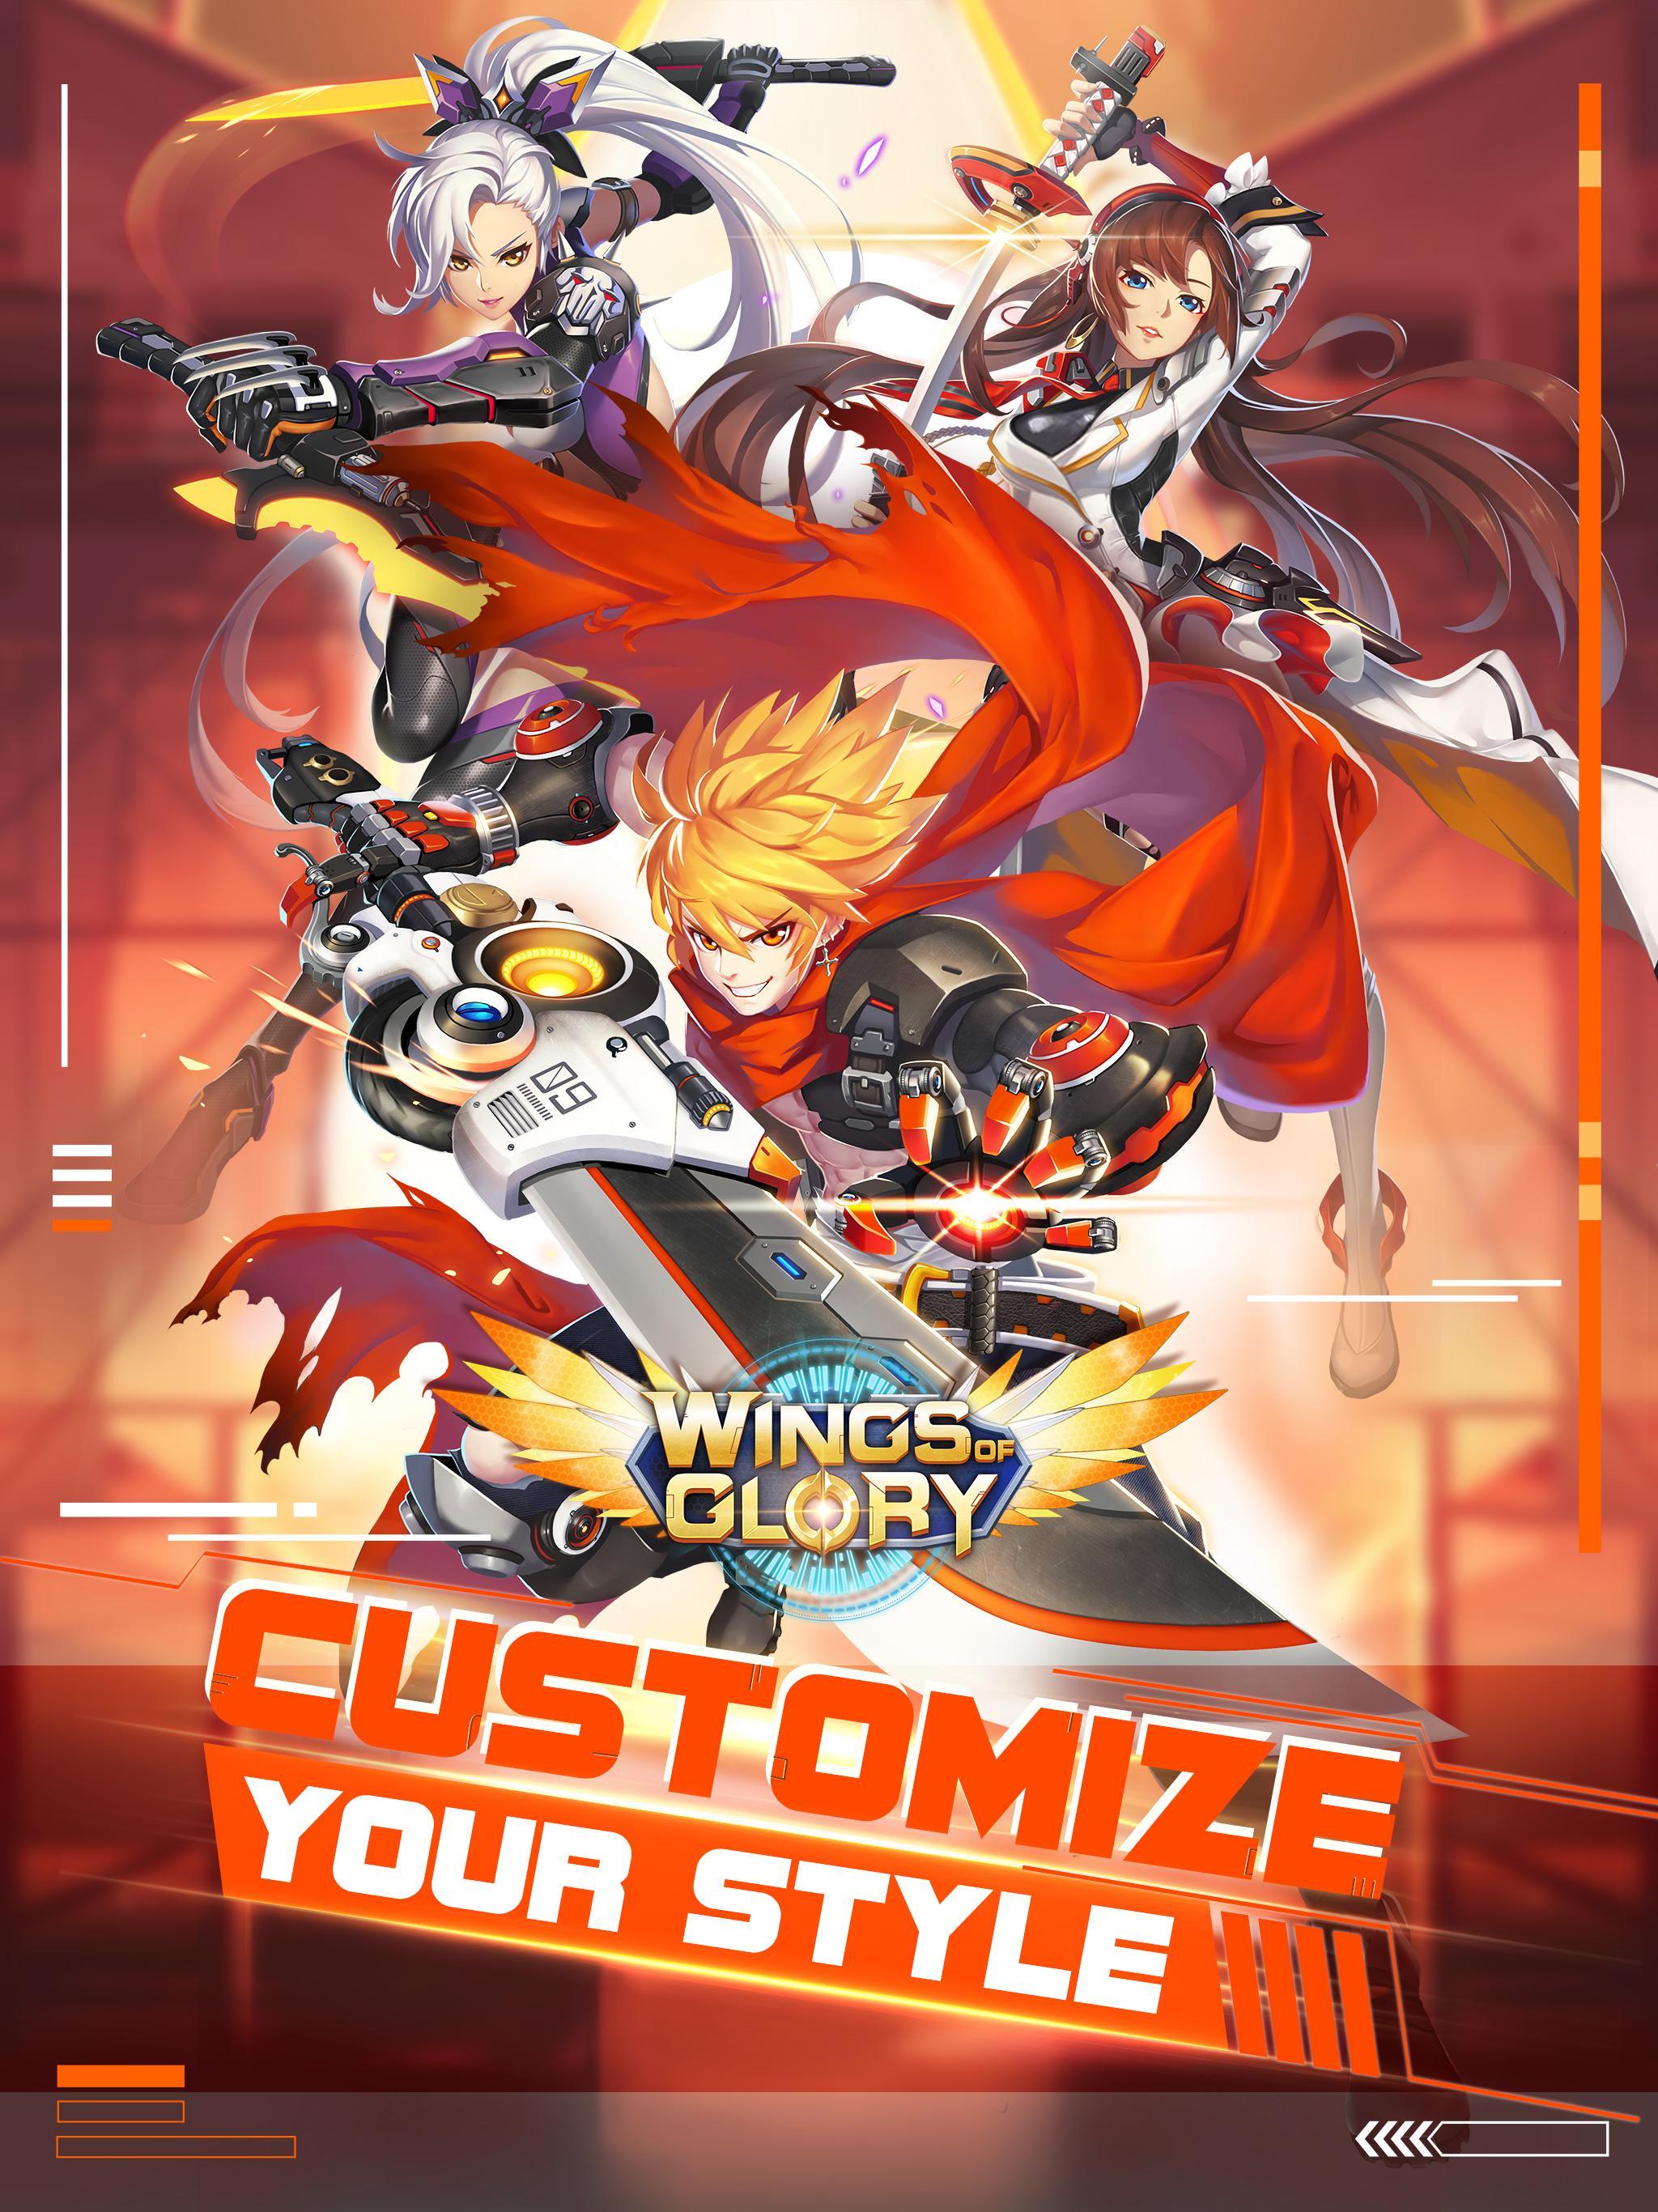 Wings Of Glory 3d Mmoprg Trade Weapons Freely For Android Apk